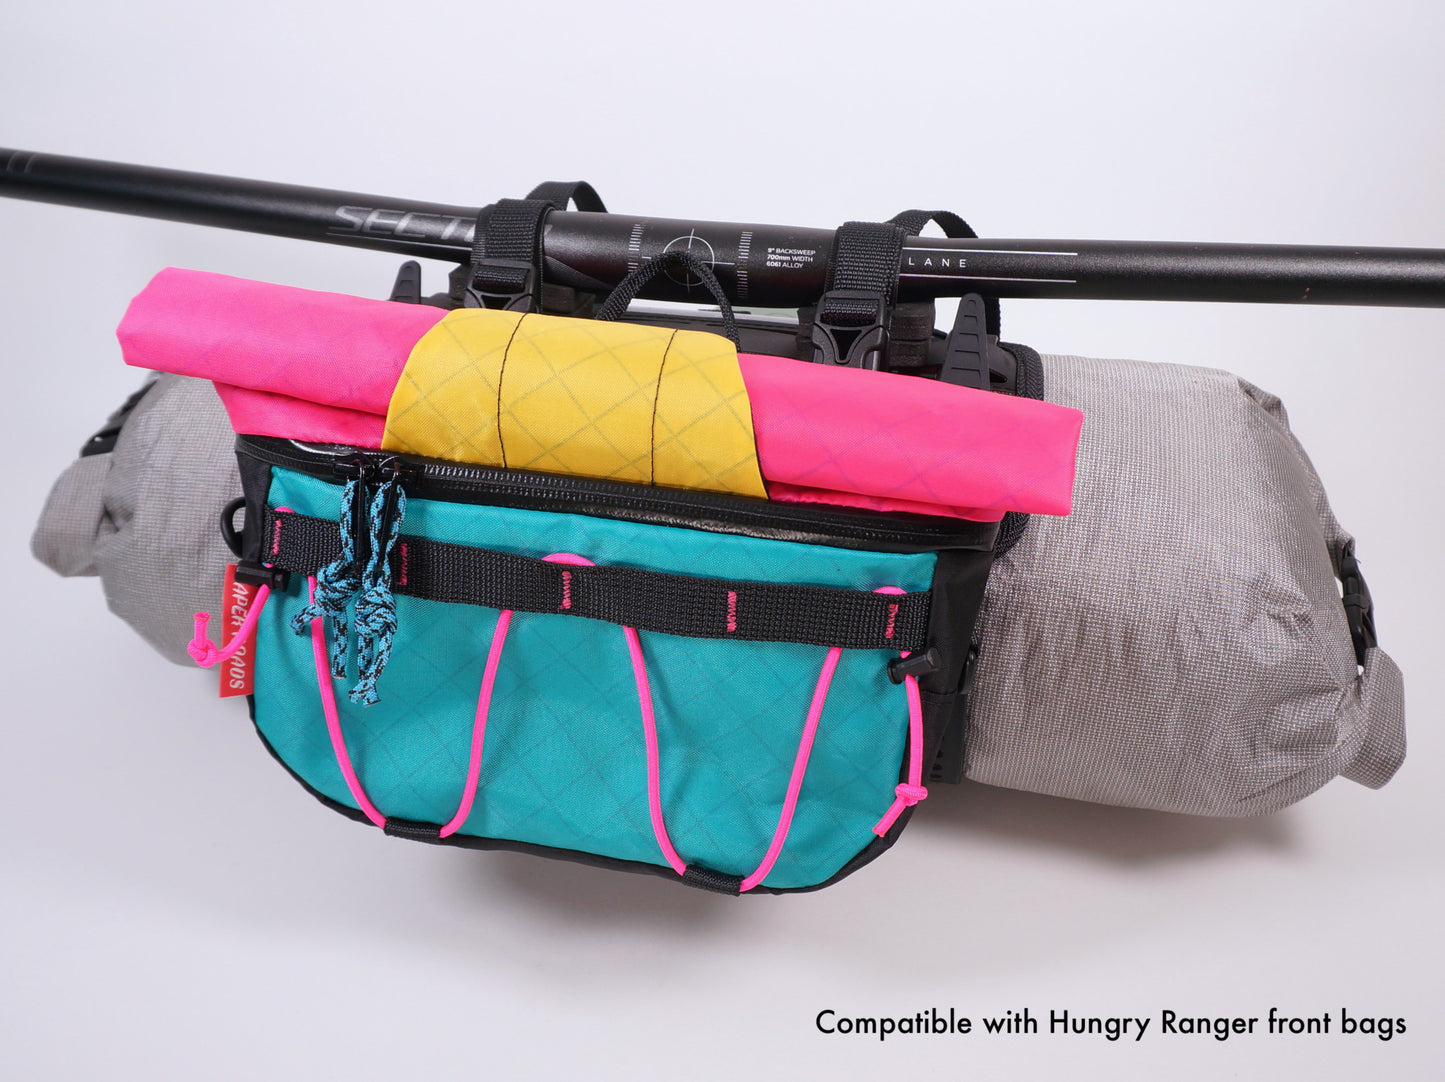 Bikepacking handlebar minimalist harness with Voile straps and Hungry Ranager bag. NZ made.